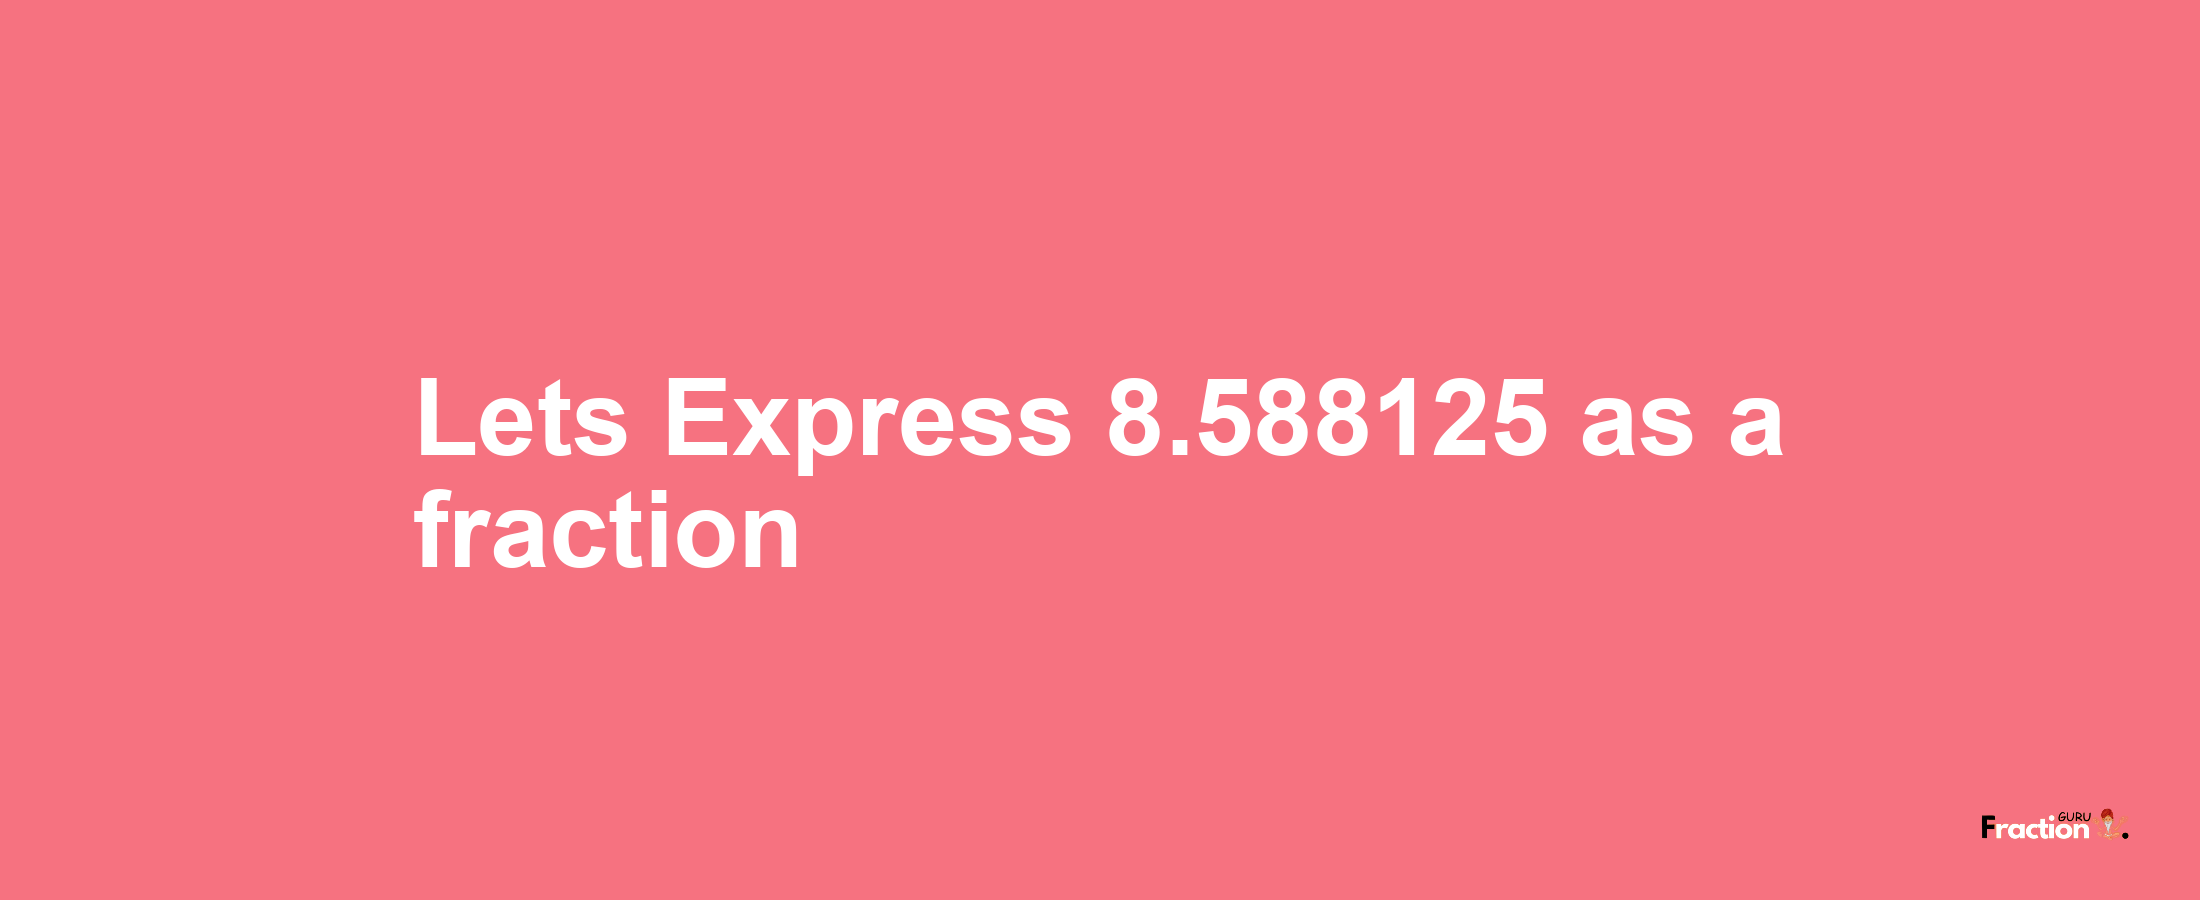 Lets Express 8.588125 as afraction